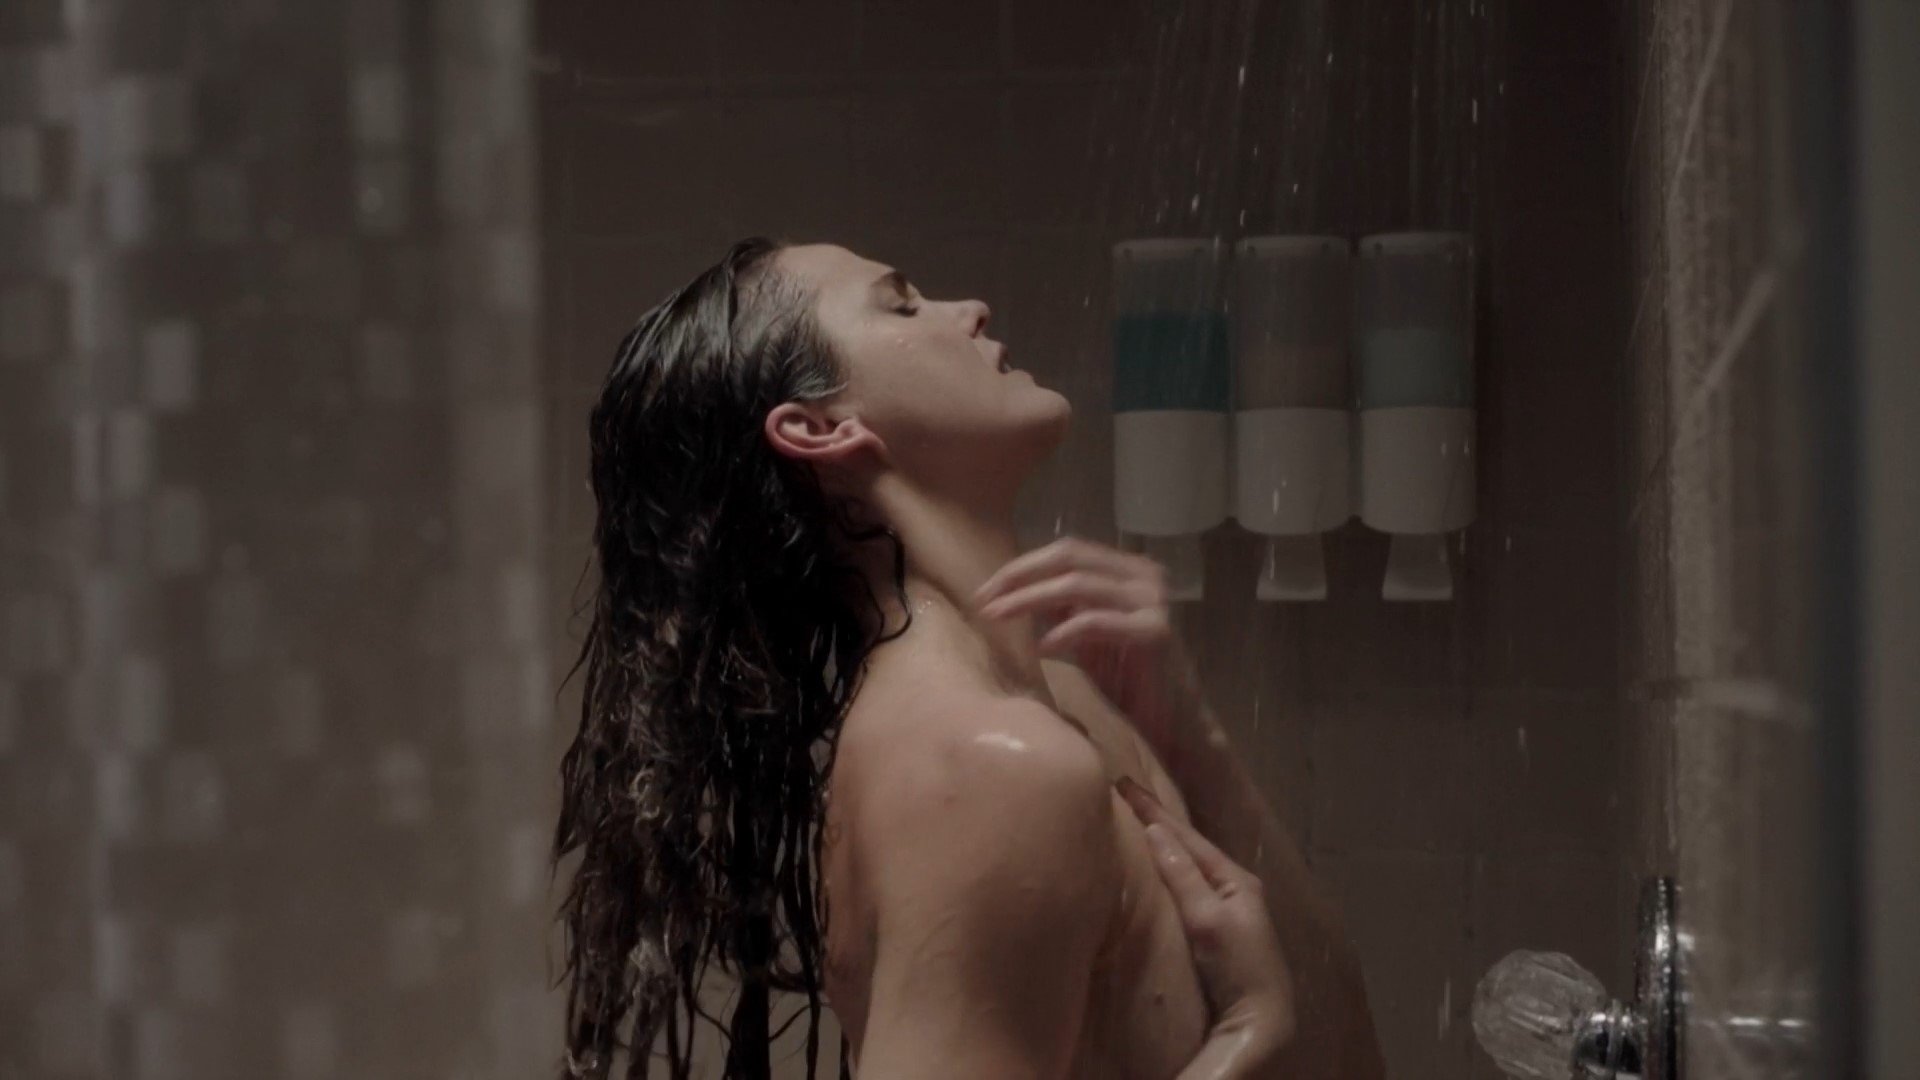 Keri Russell Nude -The Americans s05e02 (2017) - HD 1080p